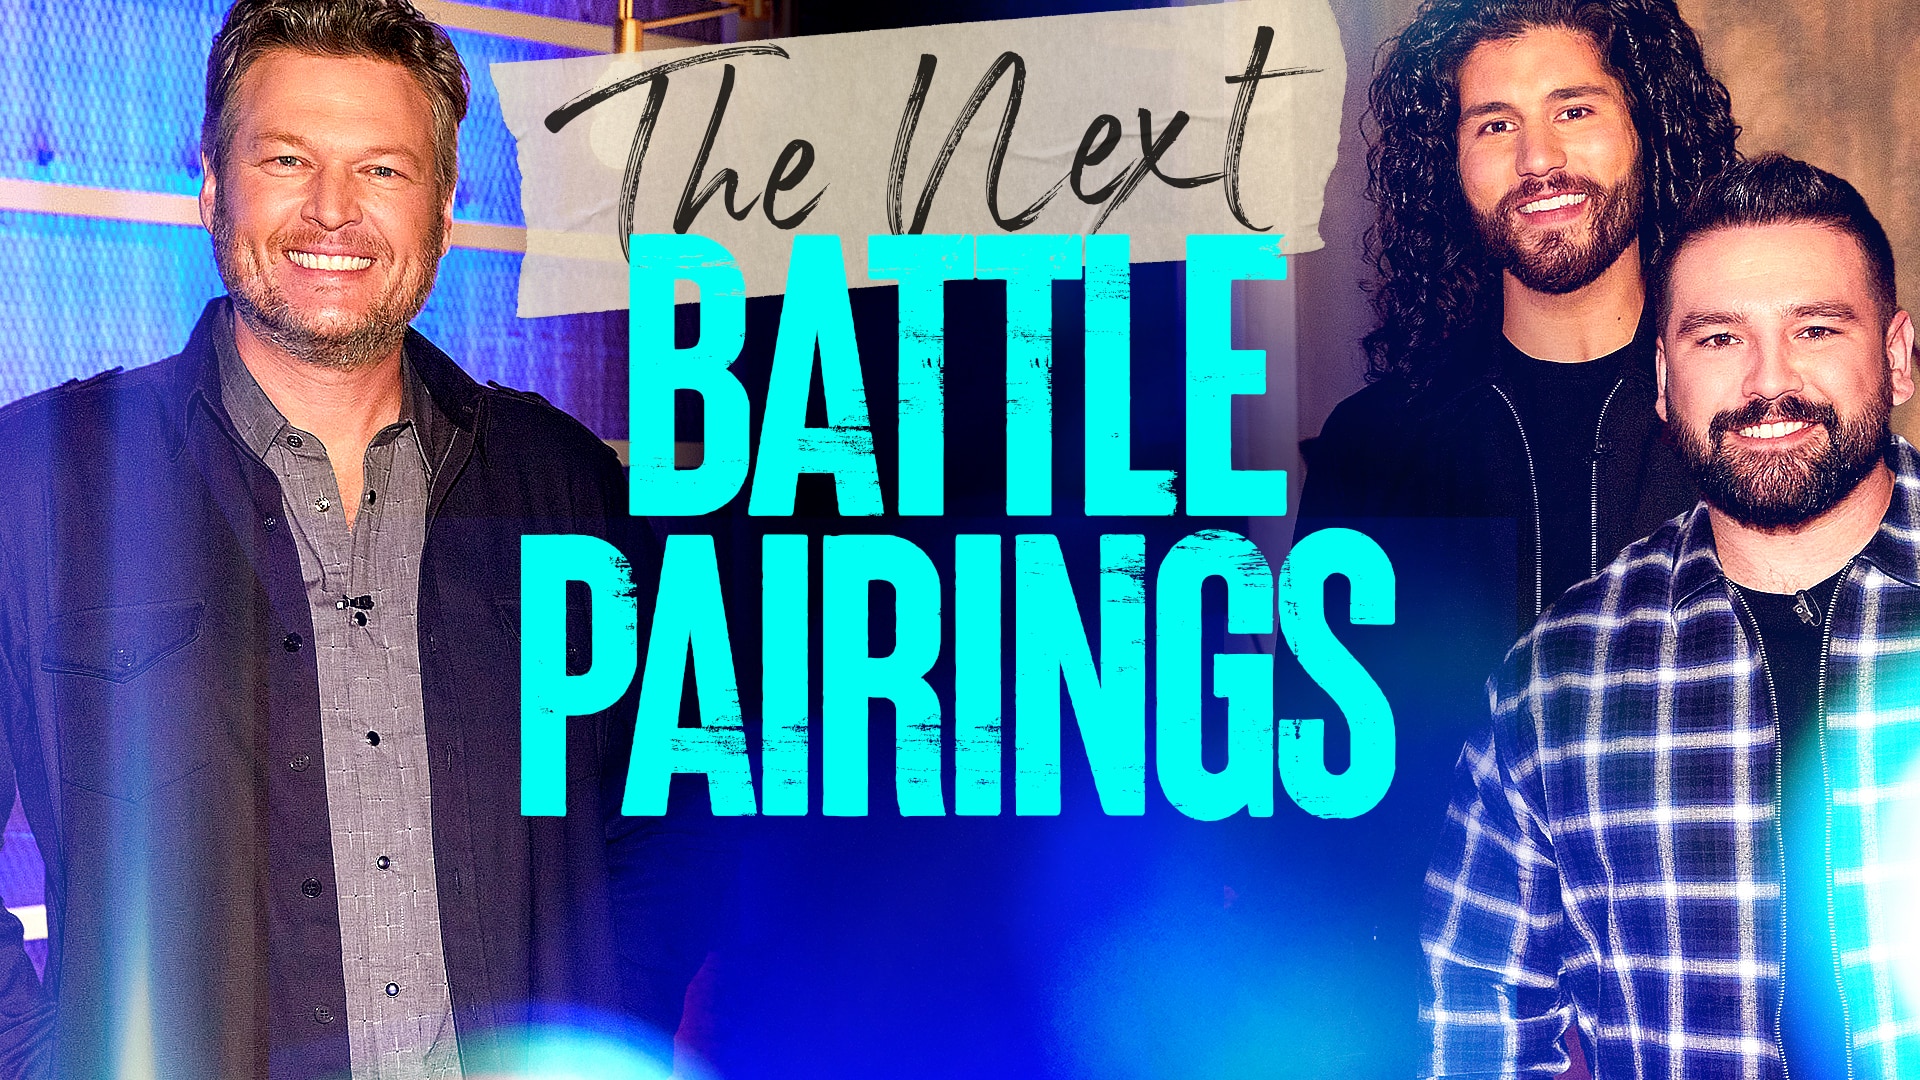 Watch The Voice Web Exclusive The Next Battle Pairings for Teams Kelly